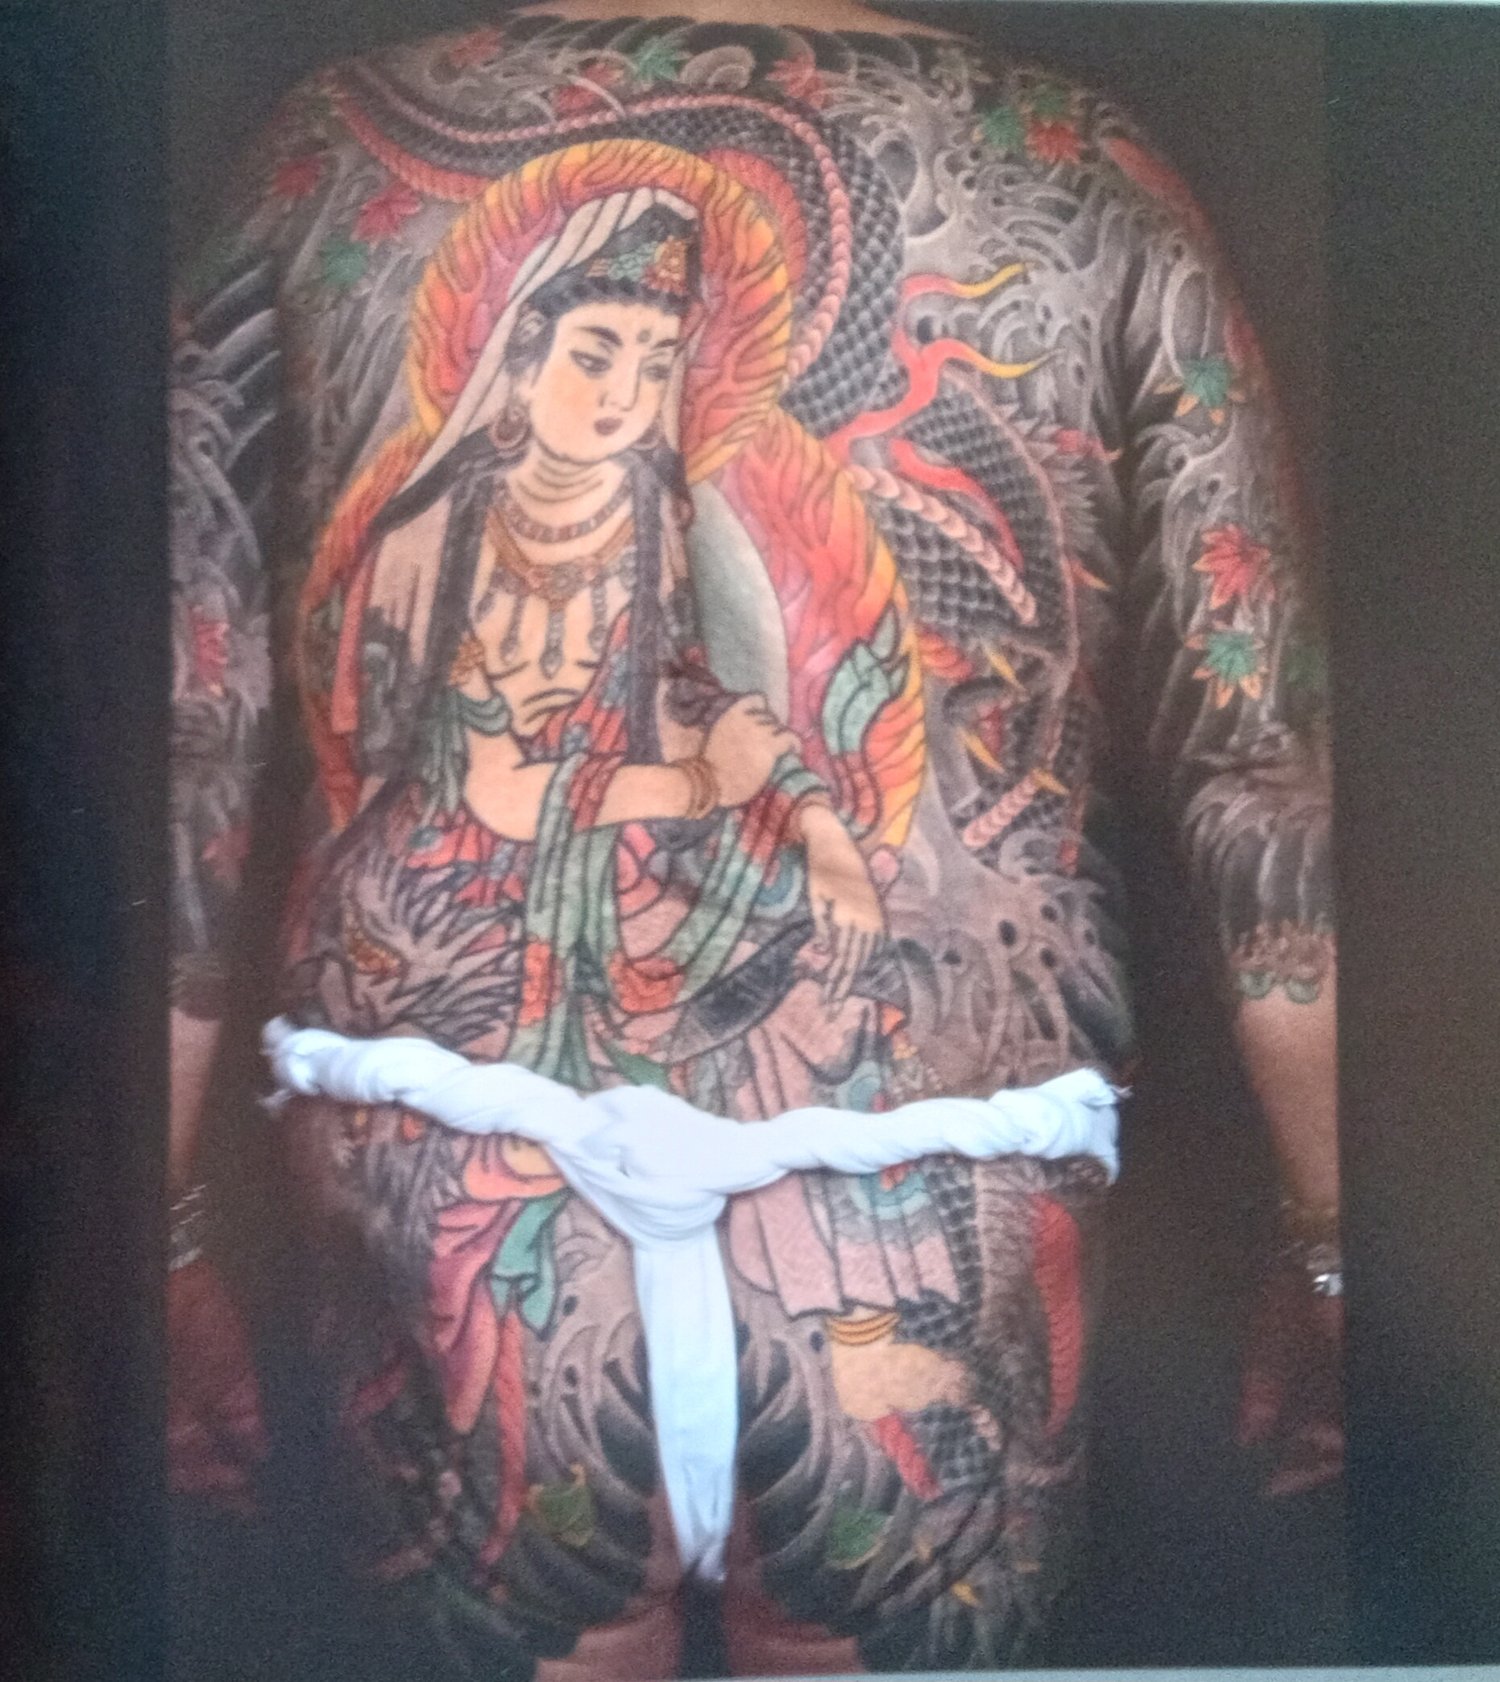 Tattoo Books, Something Wicked from Japan